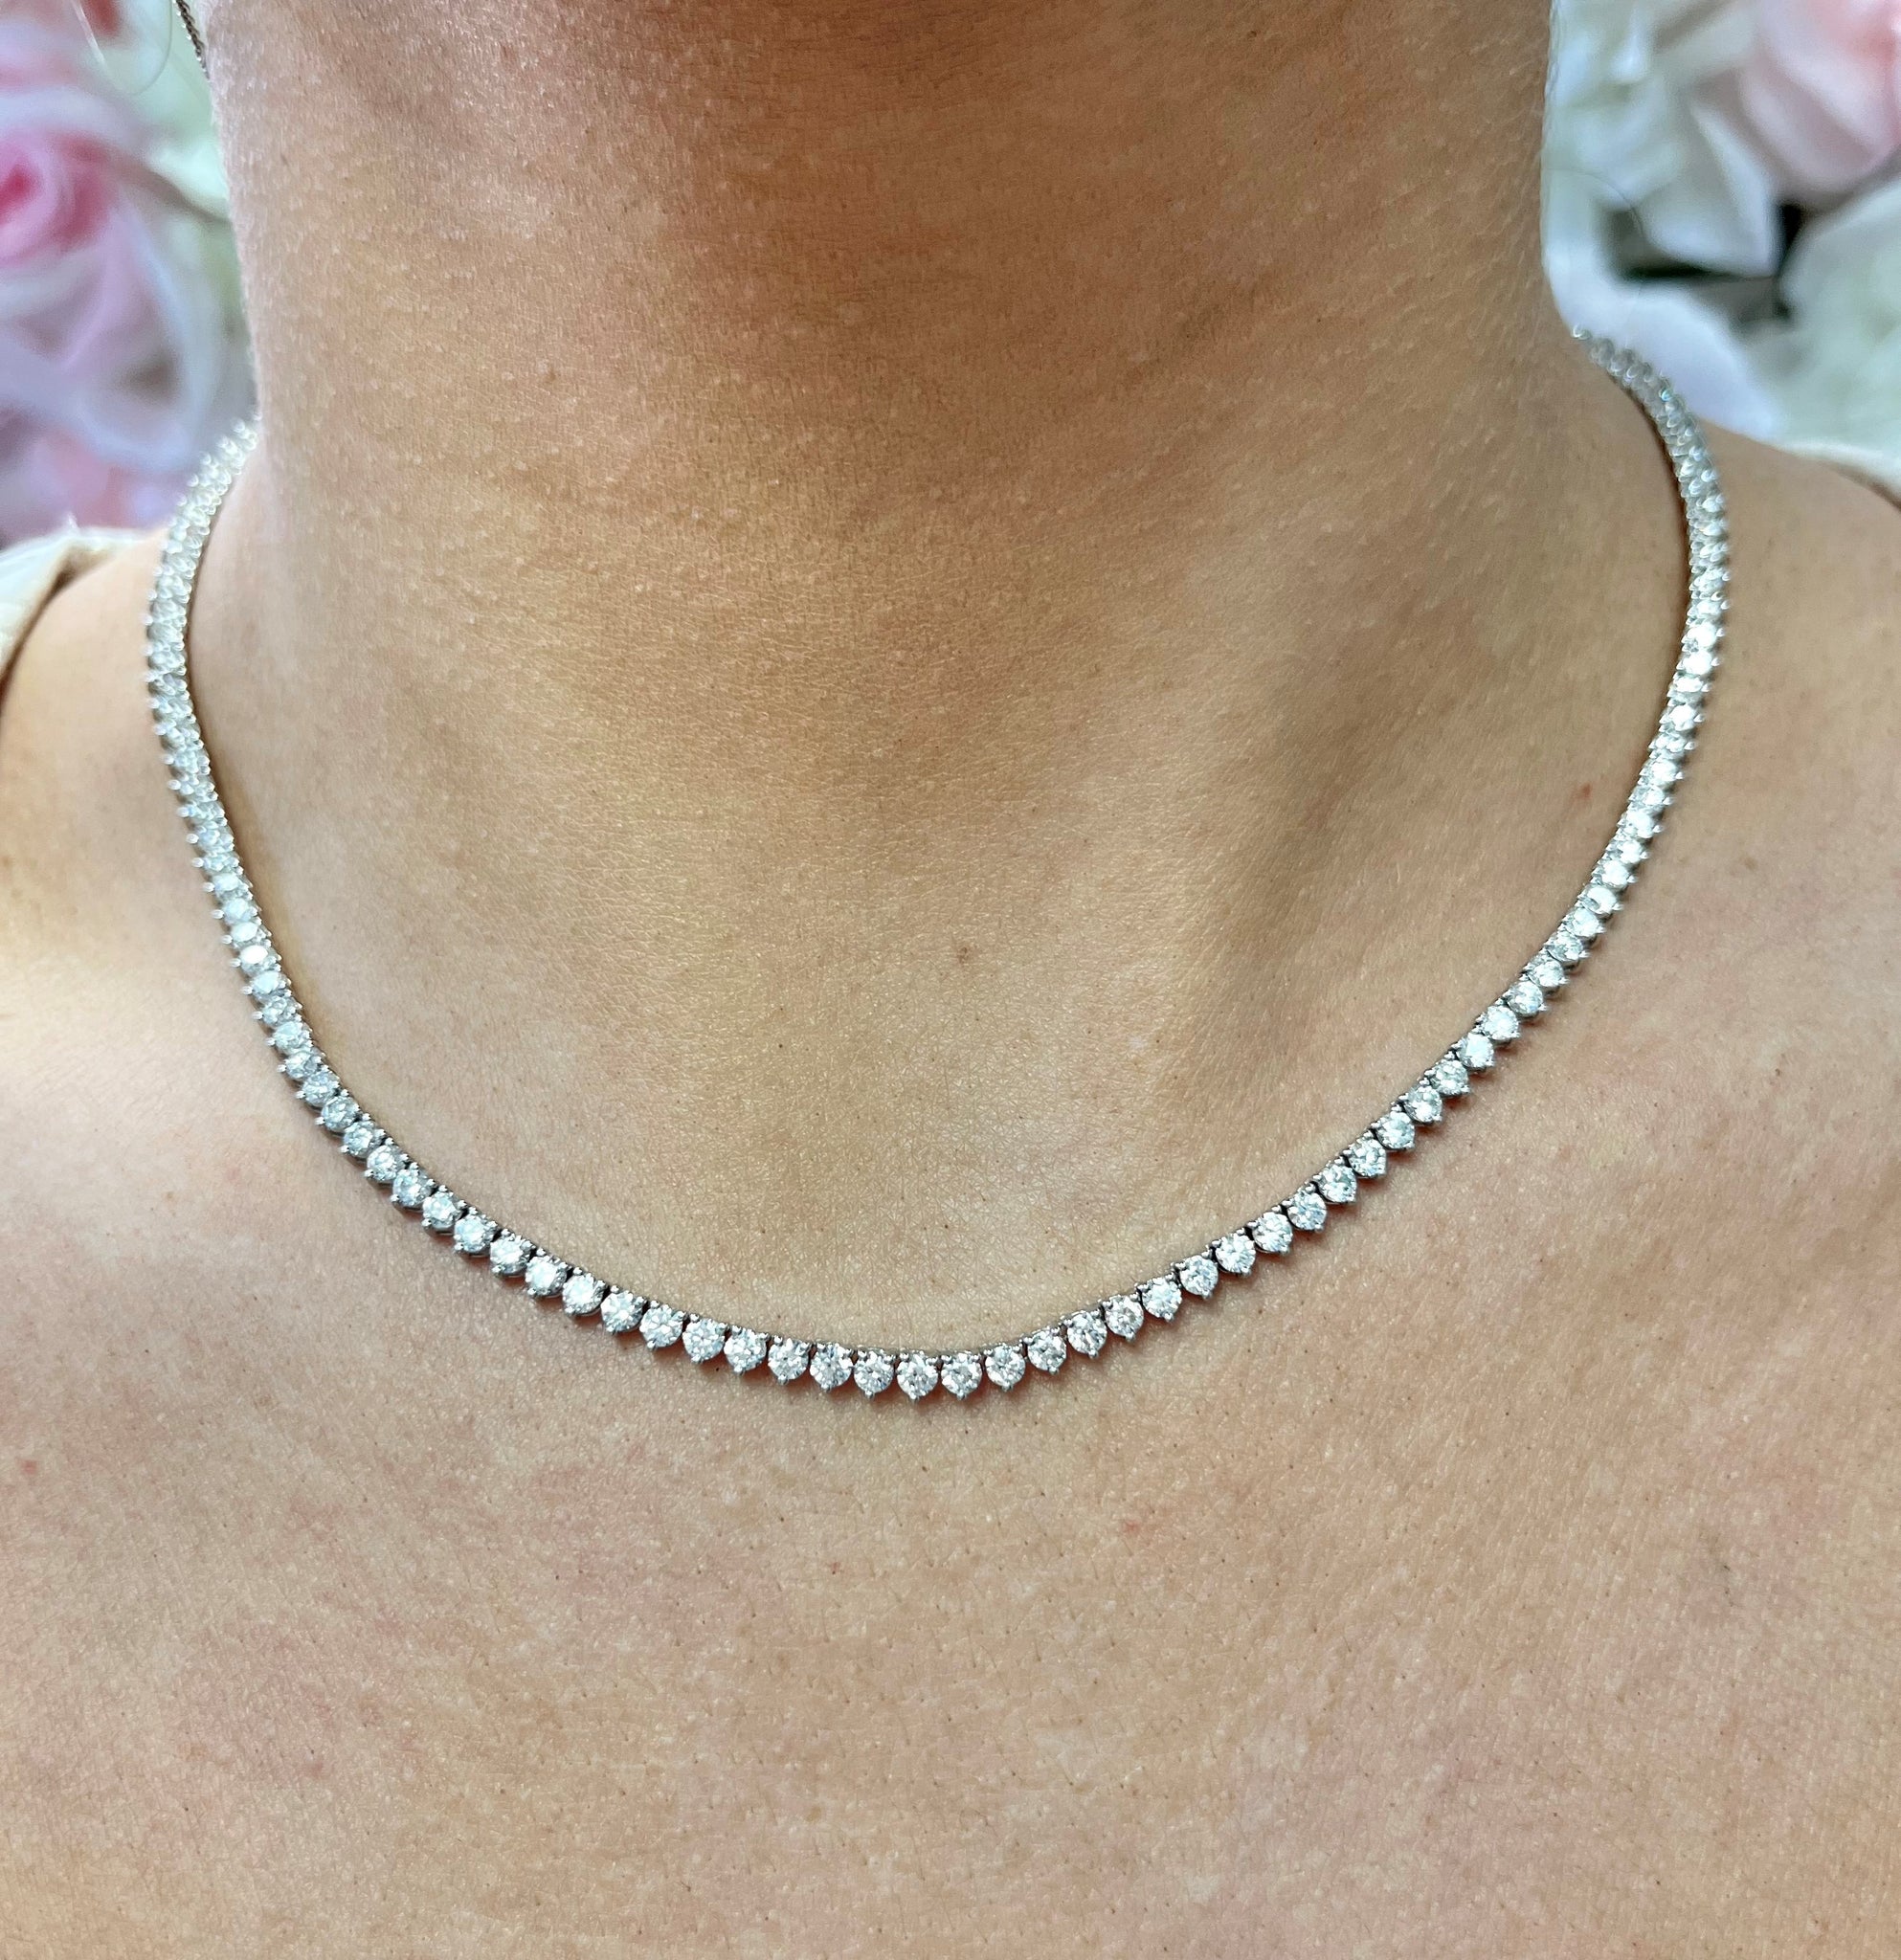 8 ct Round Diamond Graduated Tennis Necklace 3 Prong, 16 Inch - Necklaces